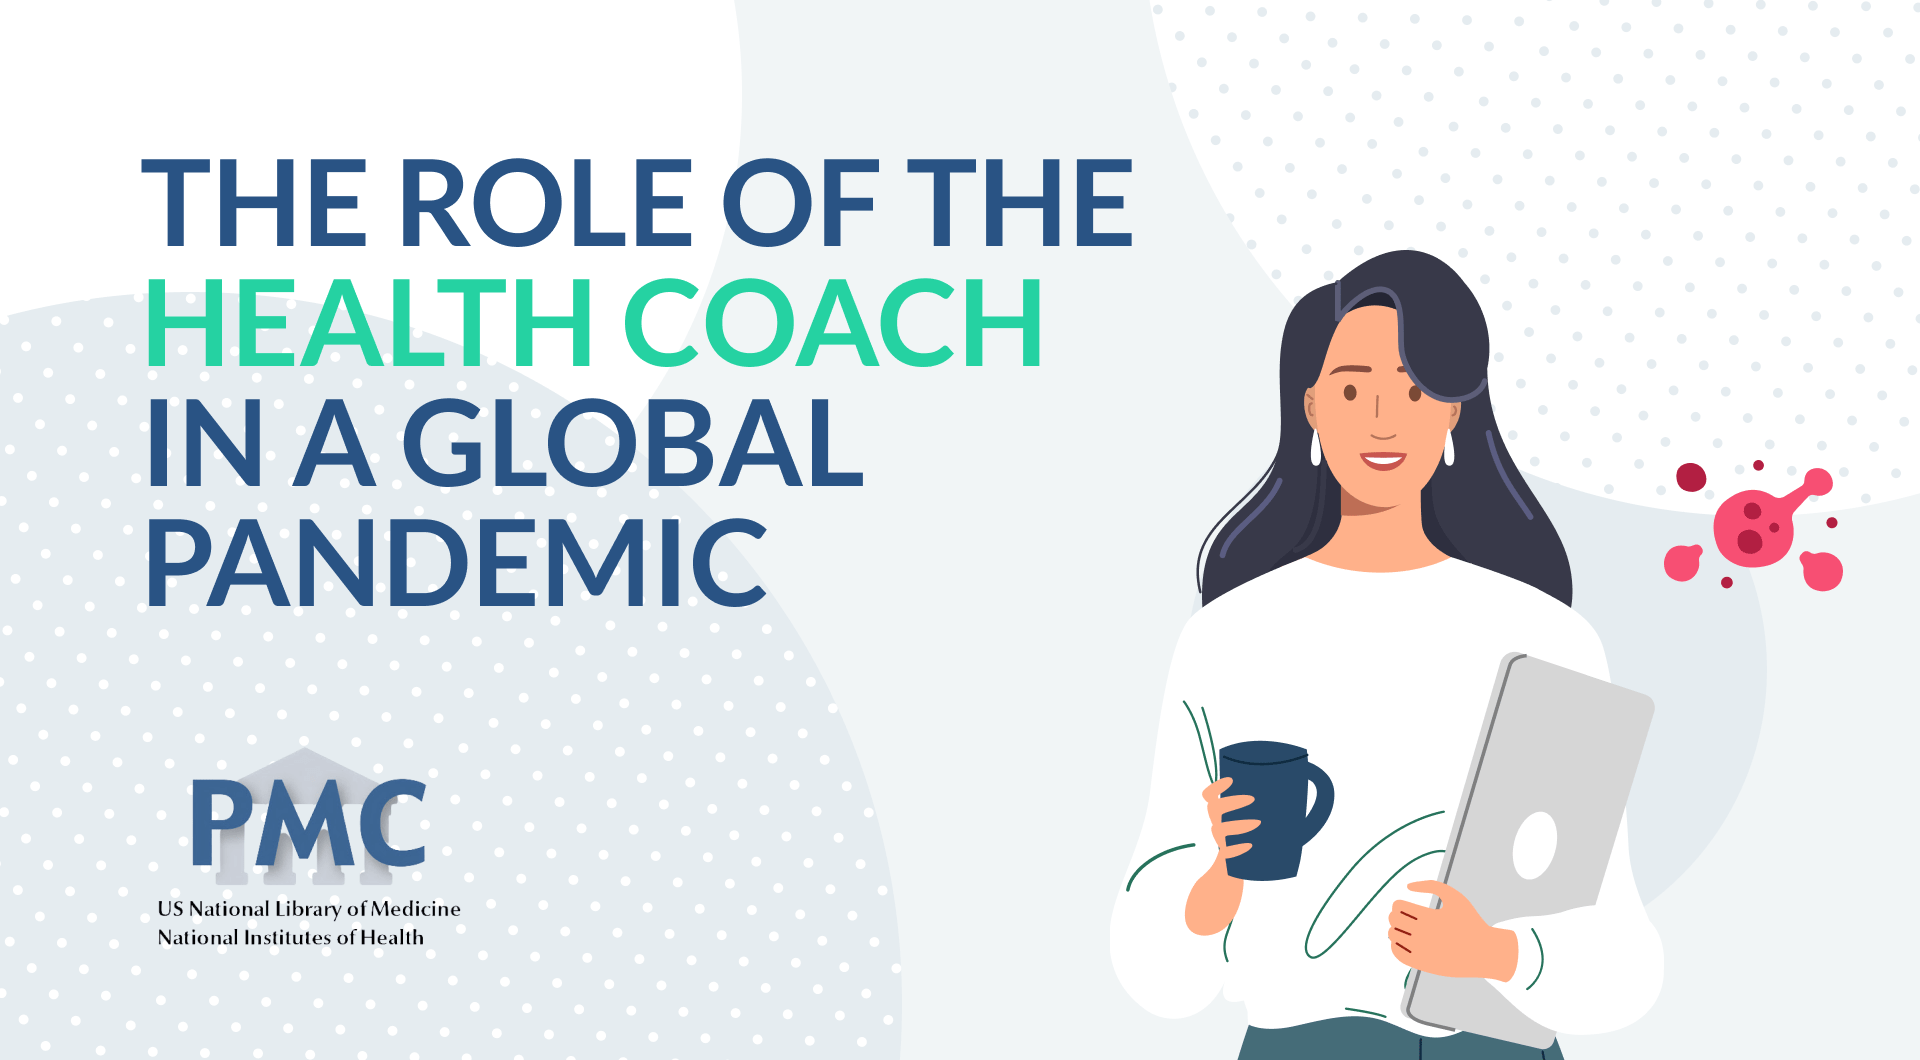 The Role of the Health Coach in a Global Pandemic